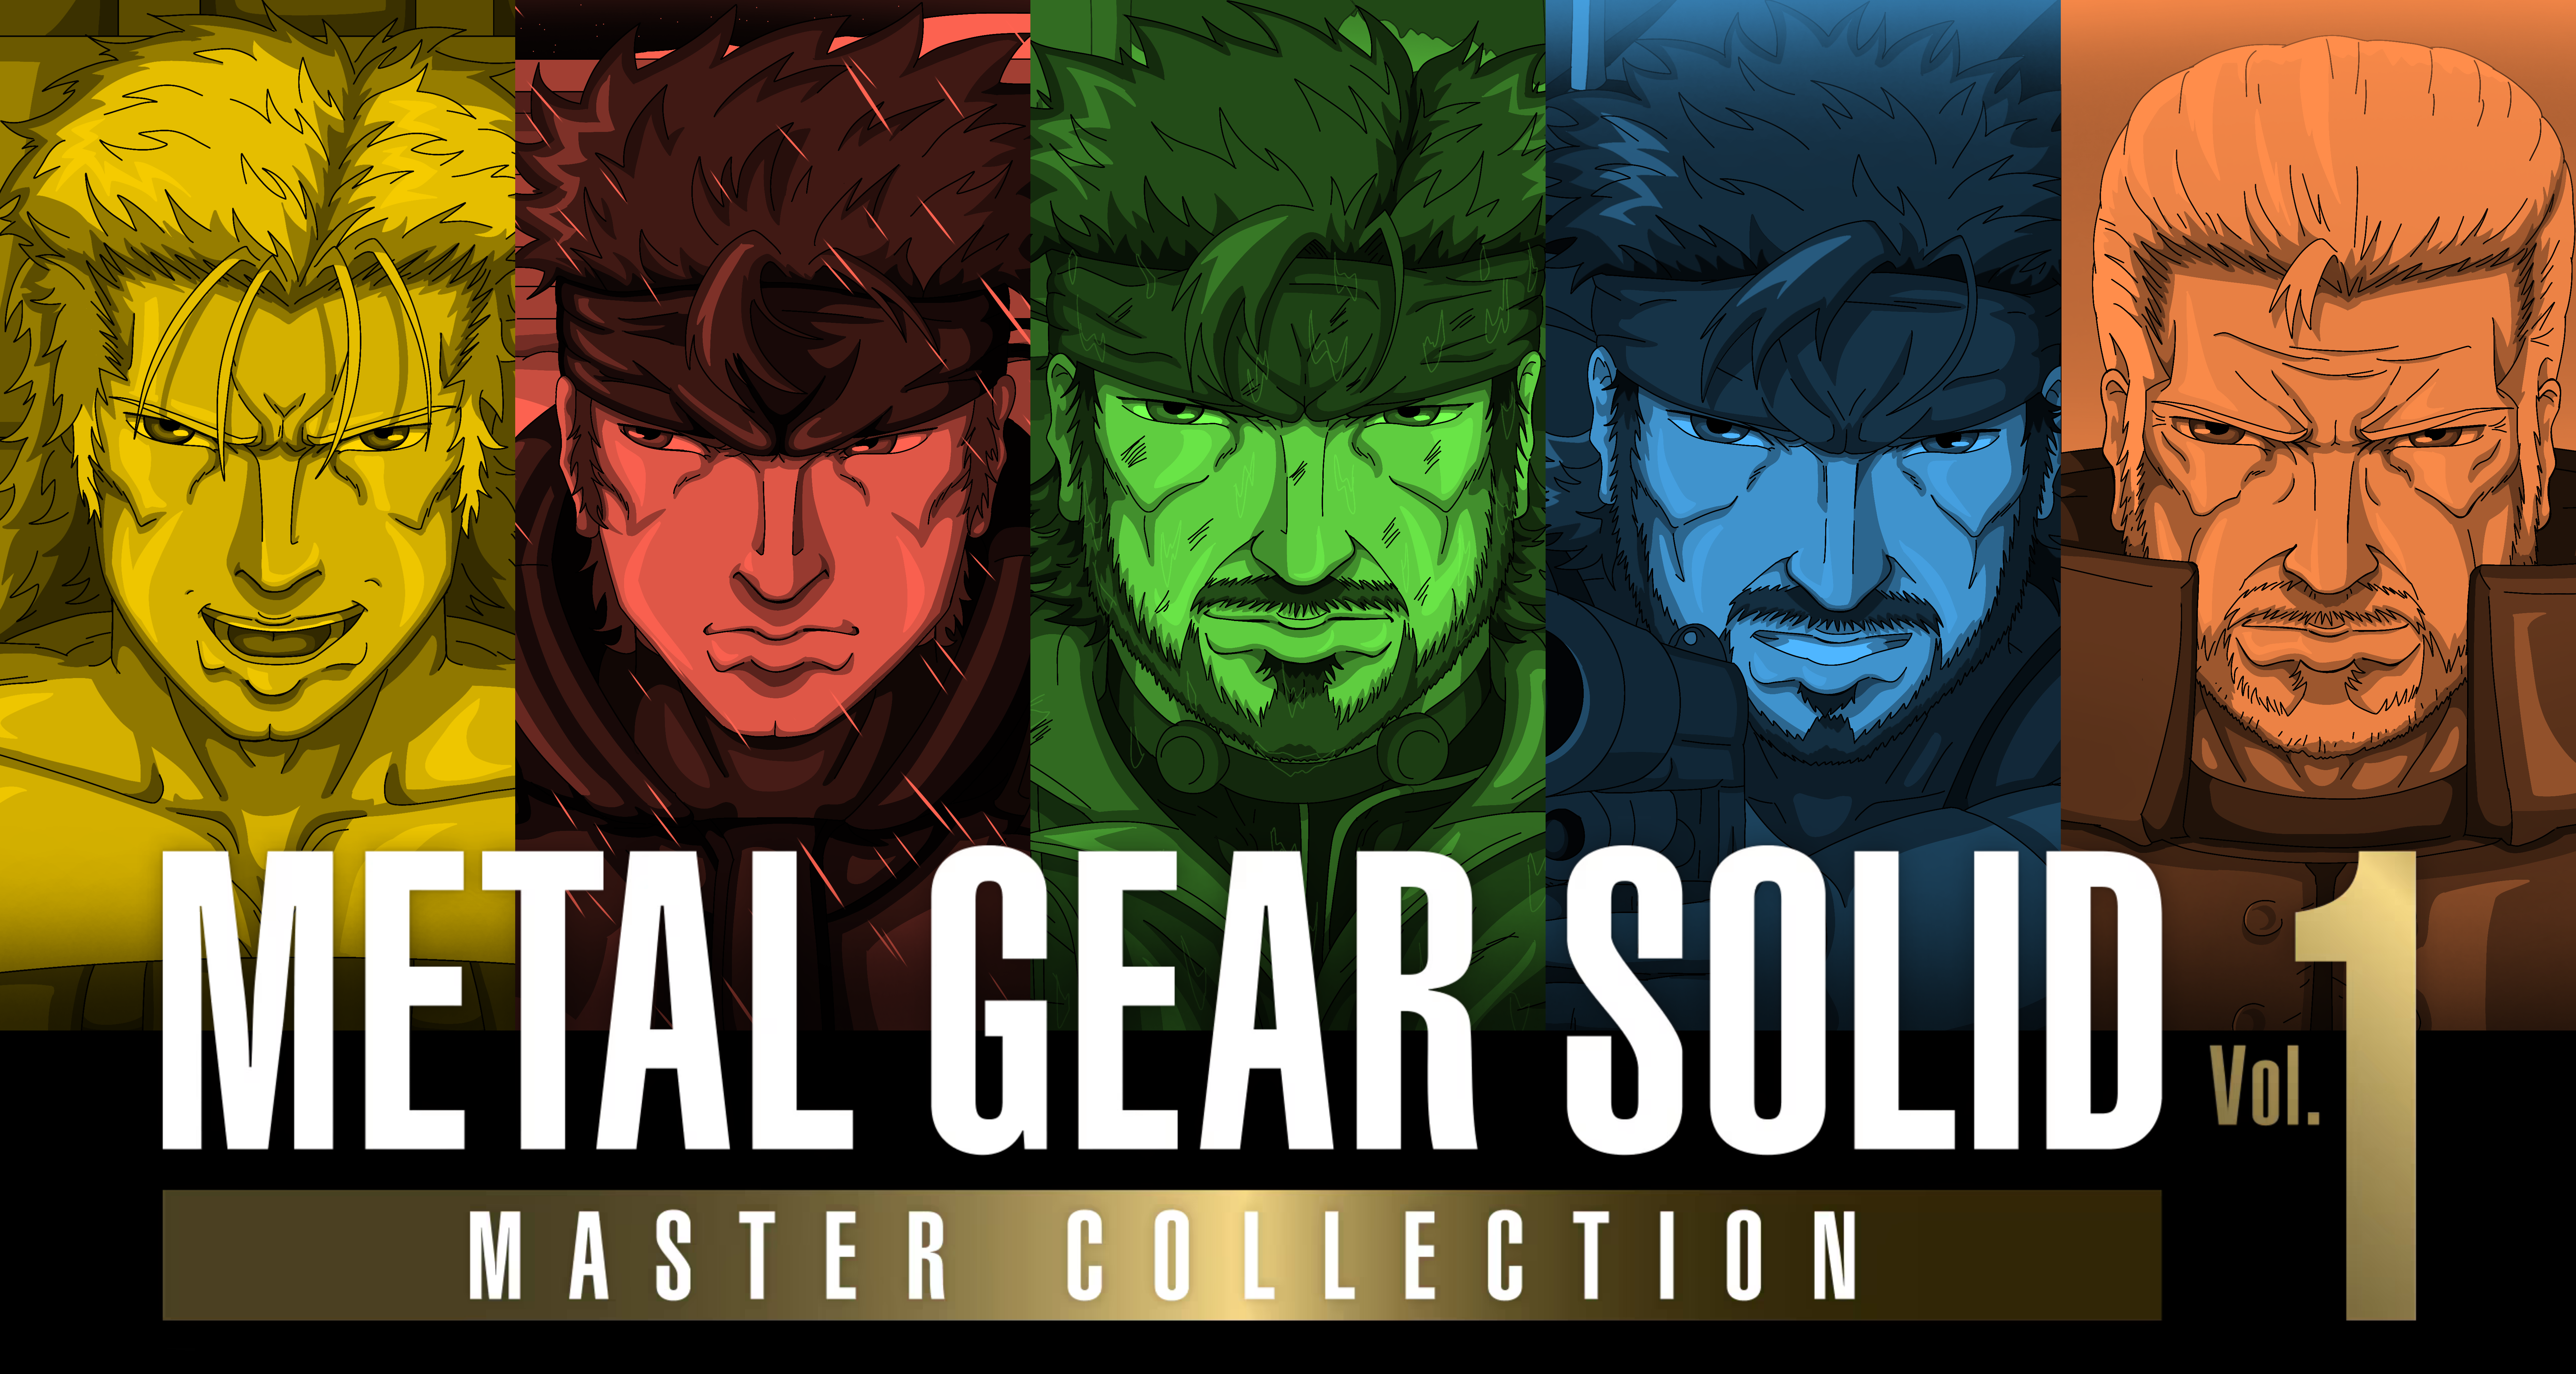 METAL GEAR SOLID: MASTER COLLECTION Vol.1 Out now! Fanart by me